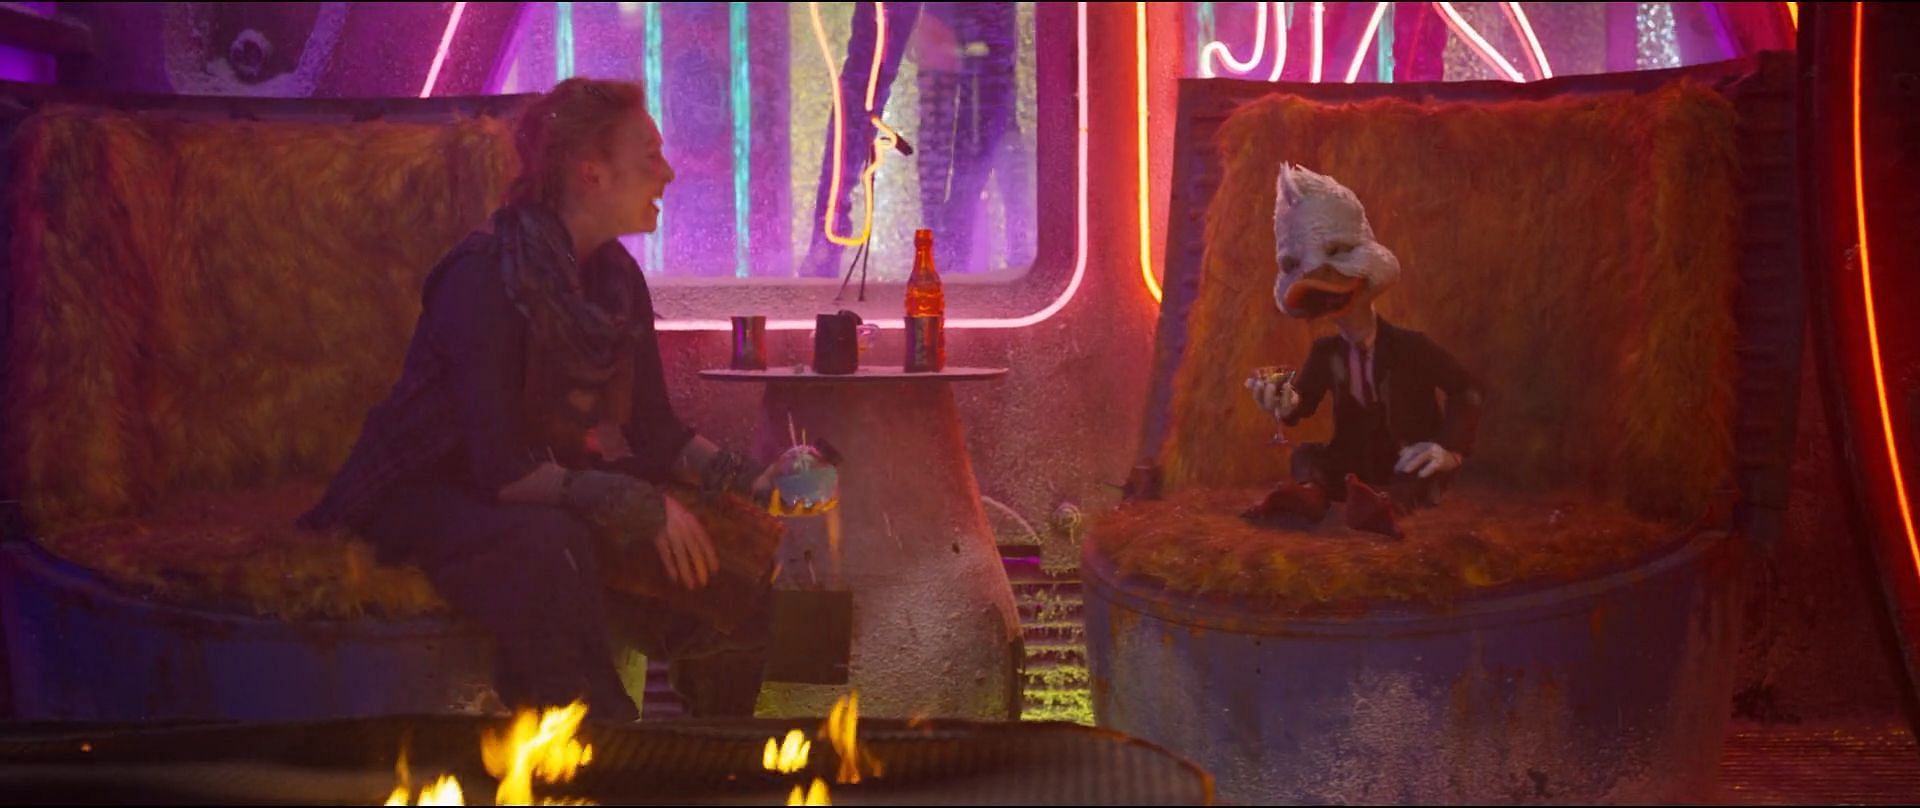 Howard the Duck in Guardians of the Galaxy Vol. 2 (Image via Marvel)